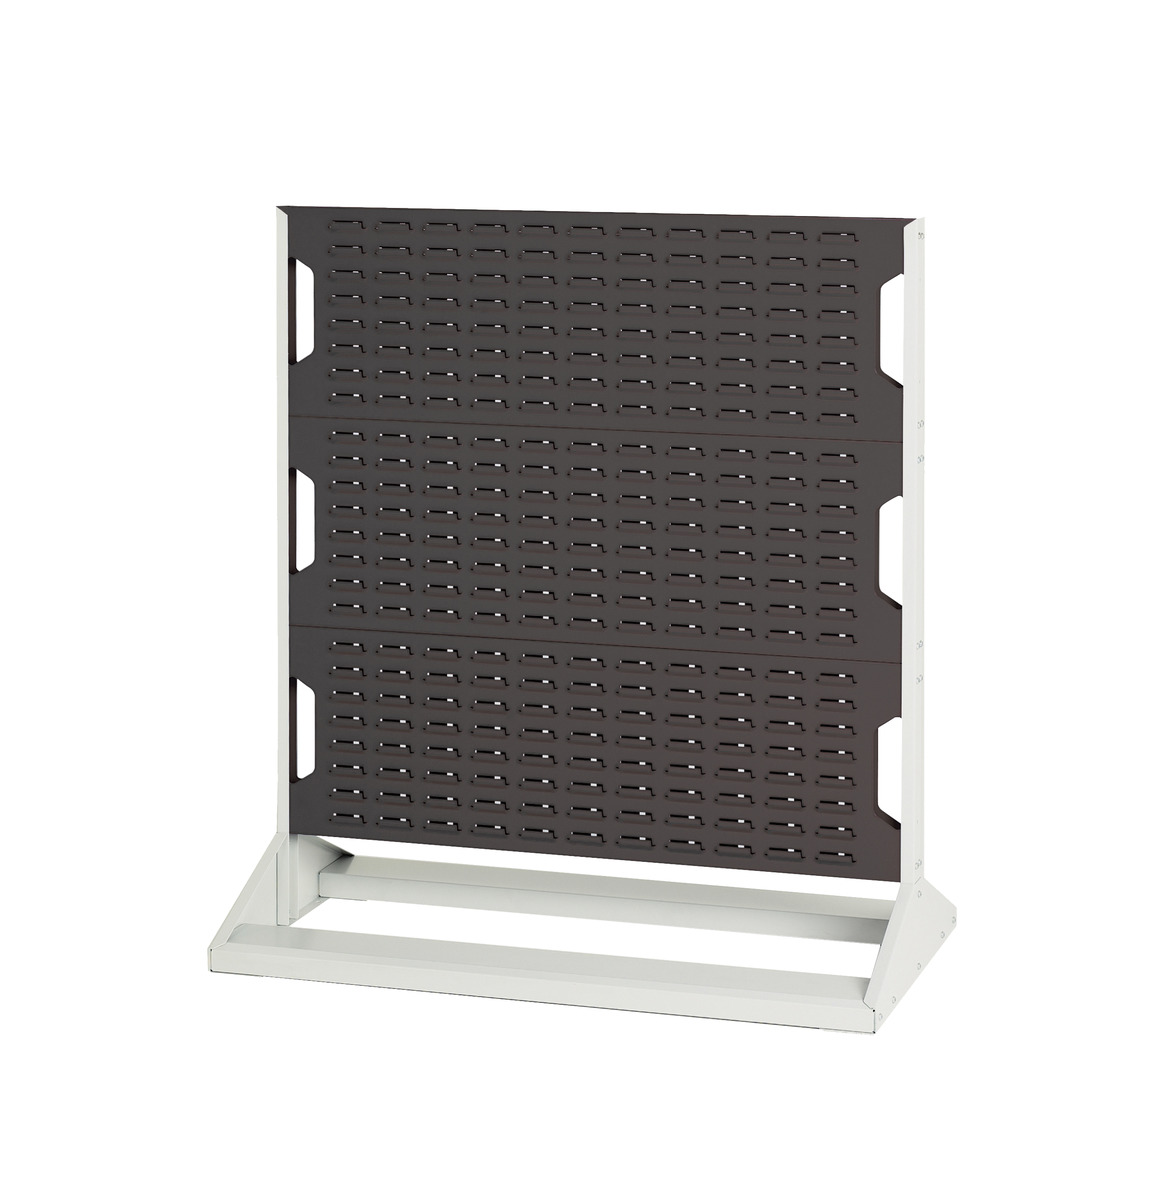 16917120. - Louvre panel rack double sided